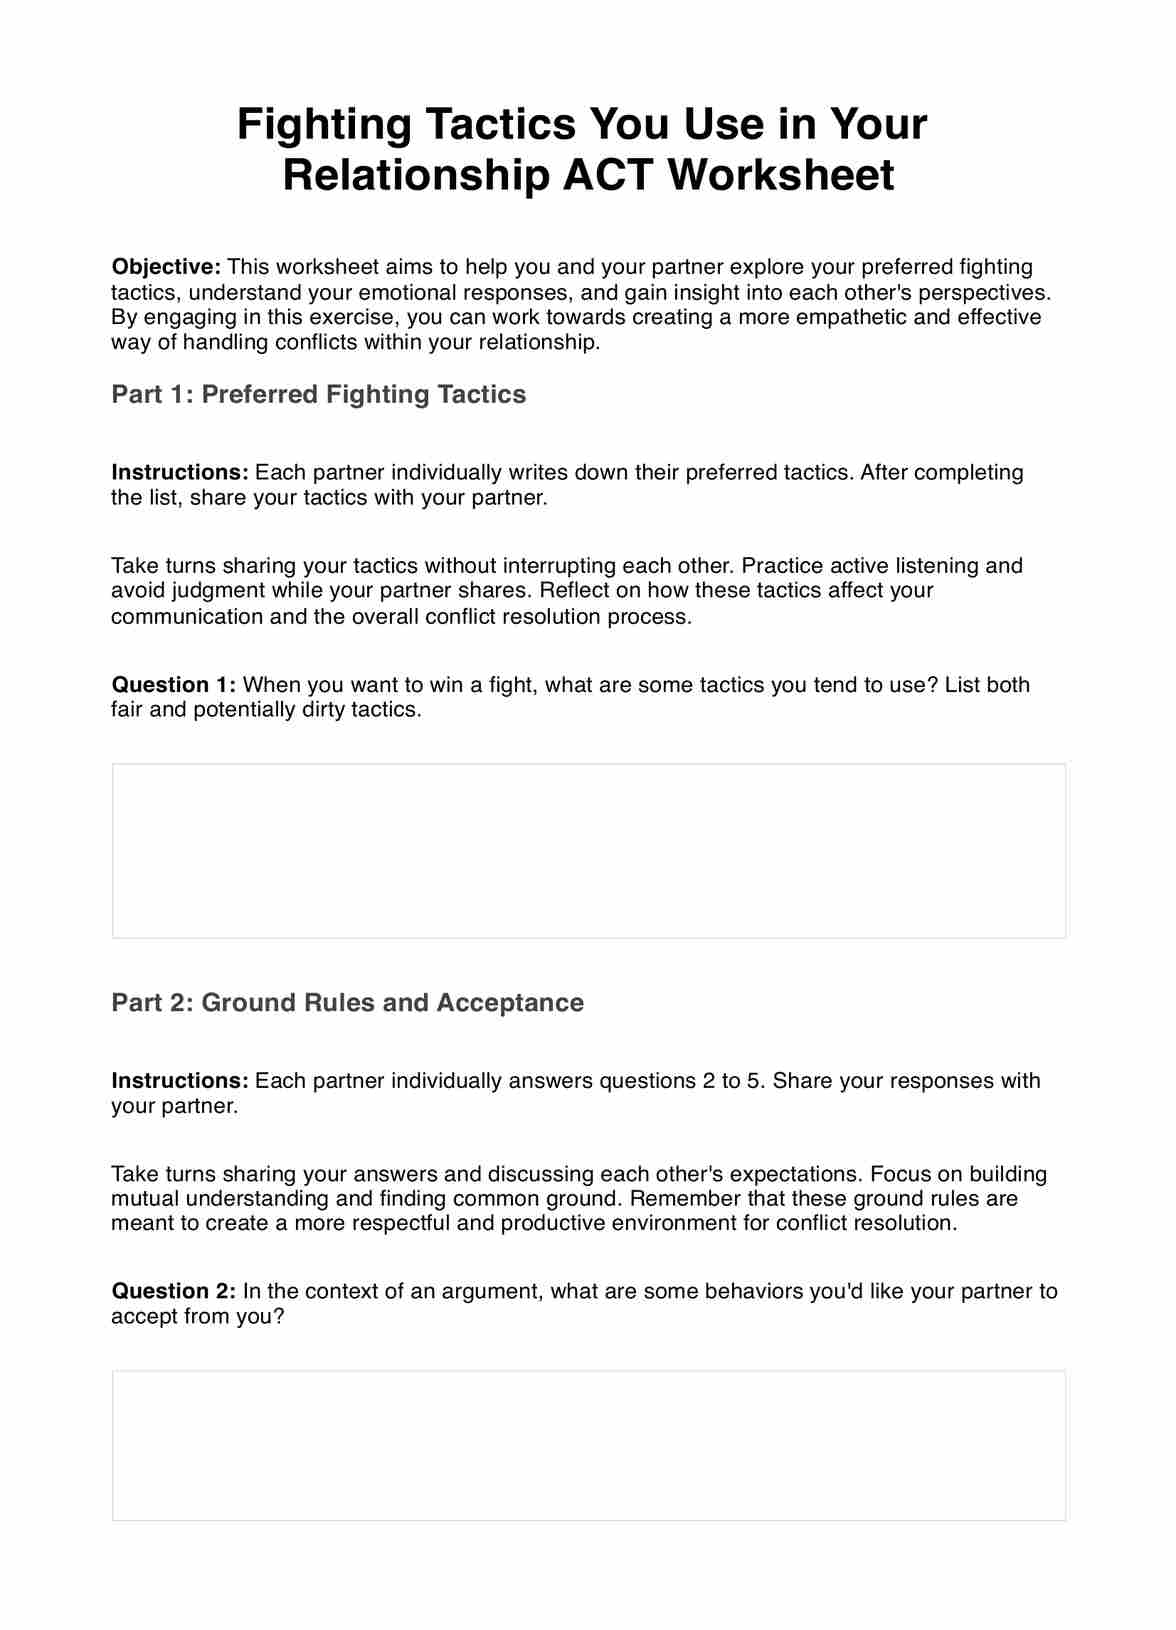 Fighting Tactics You Use in Your Relationship ACT Worksheet PDF Example